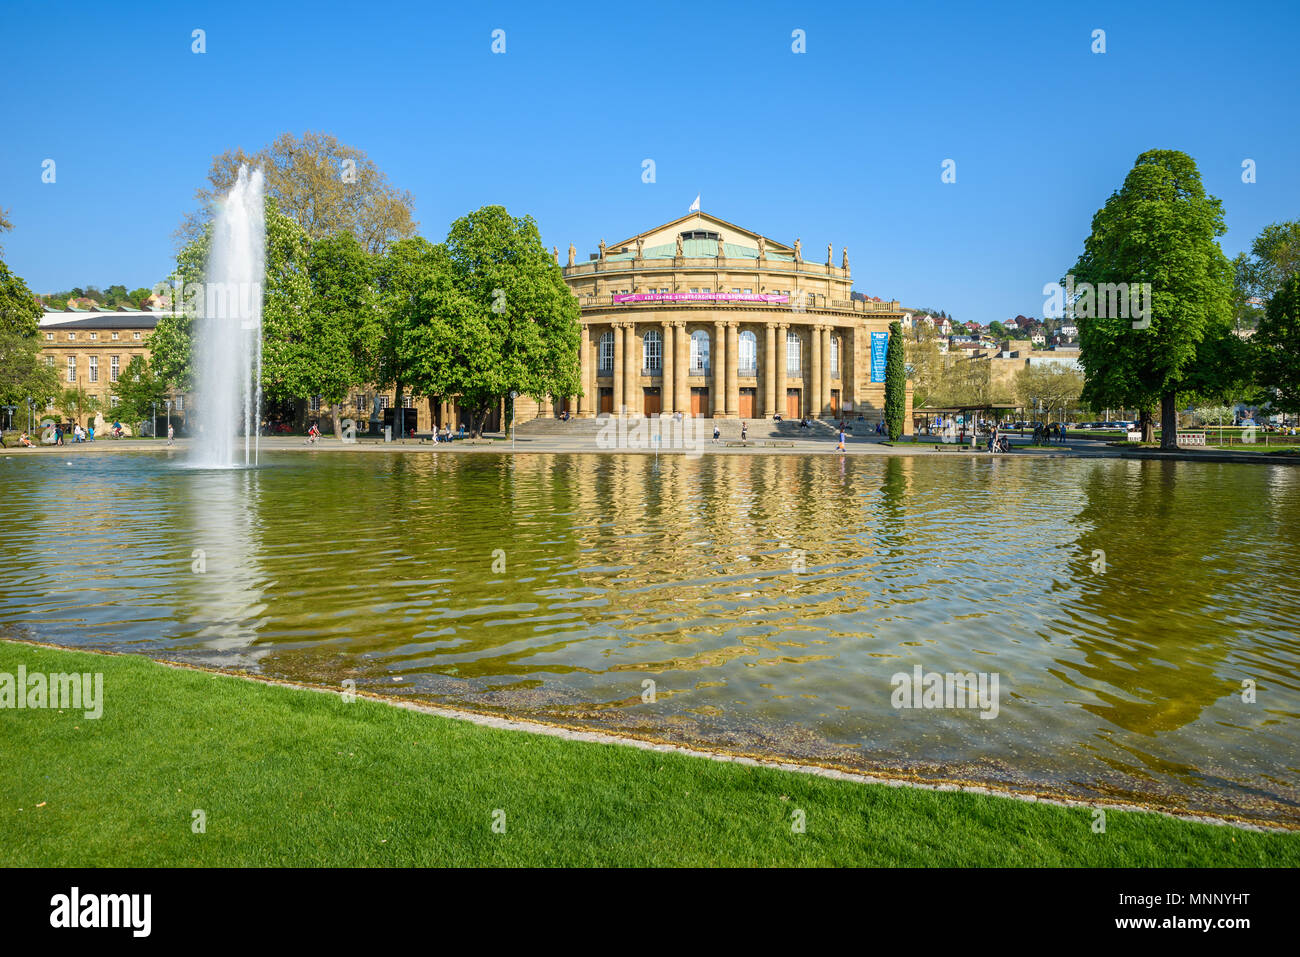 Stuttgart State Theatre Opera building and fountain in Eckensee lake, Germany Stock Photo